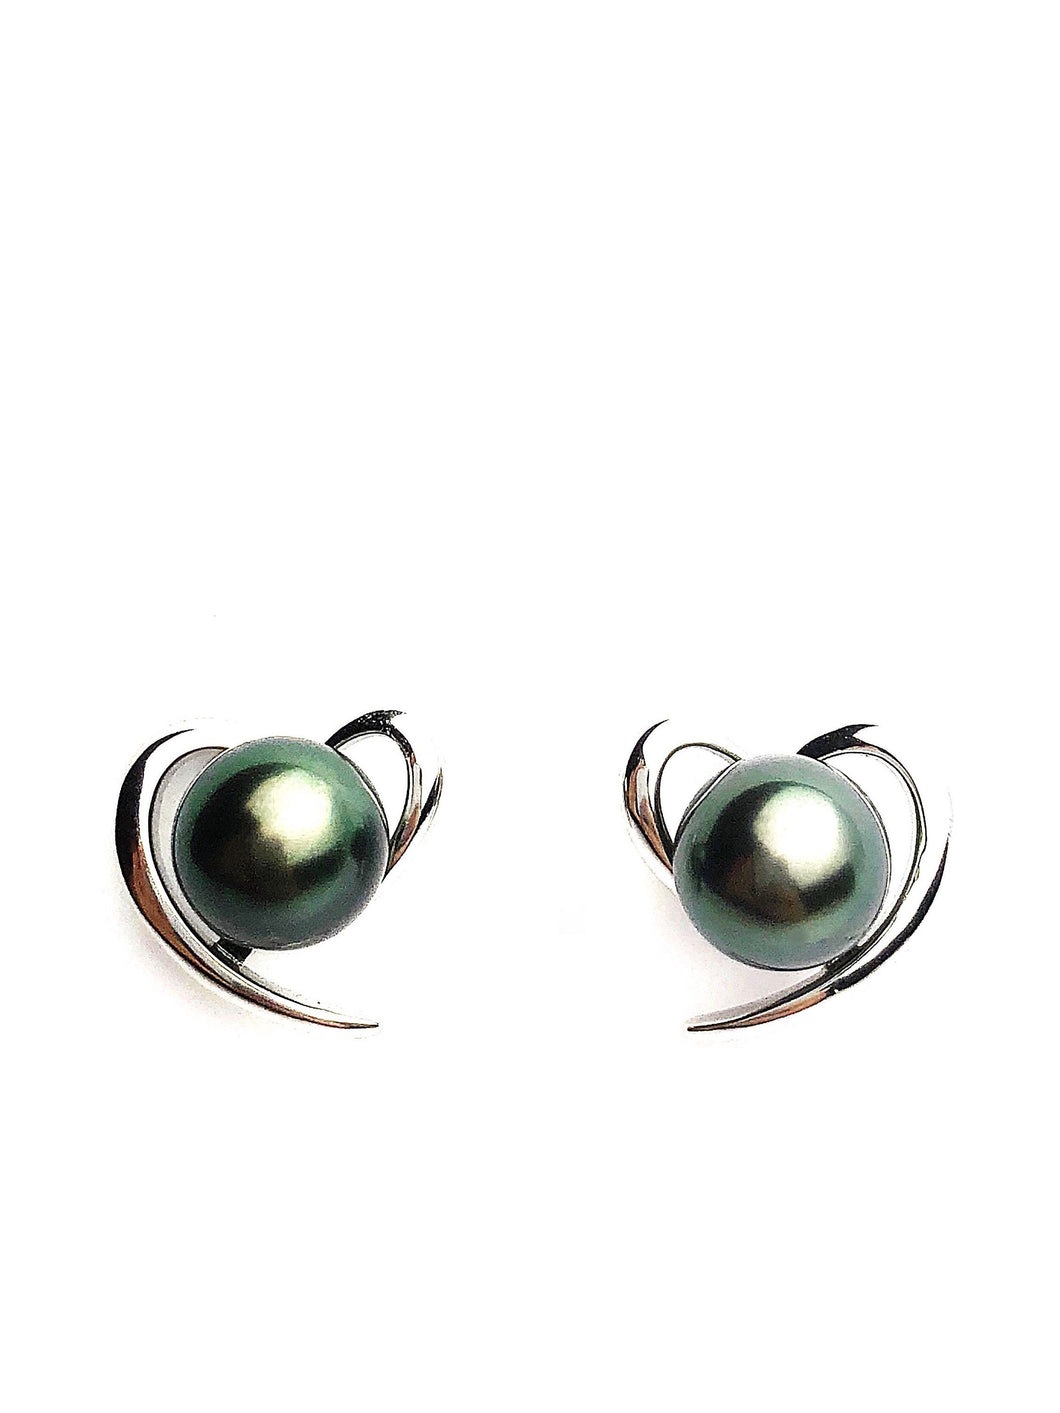 Sterling Silver Pearl Earring Settings - SE46. Setting only. No pearls included.